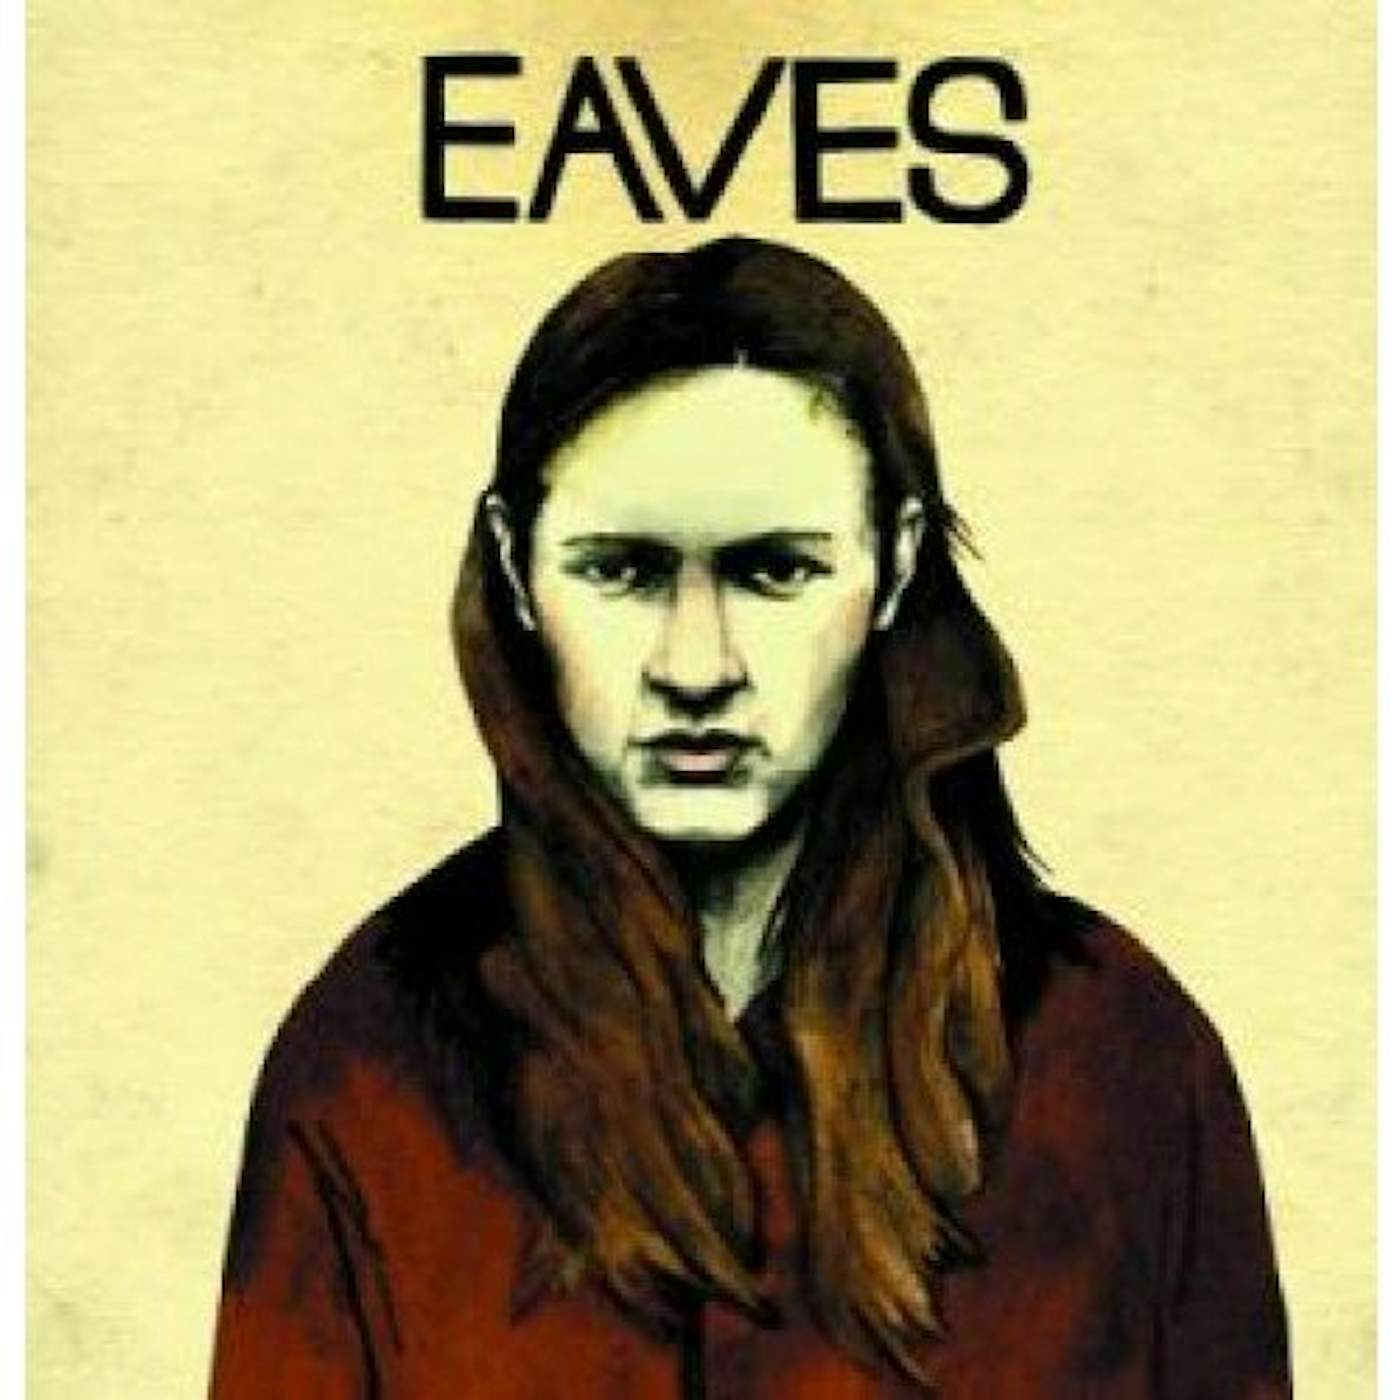 Eaves As Old As The Grave Vinyl Record